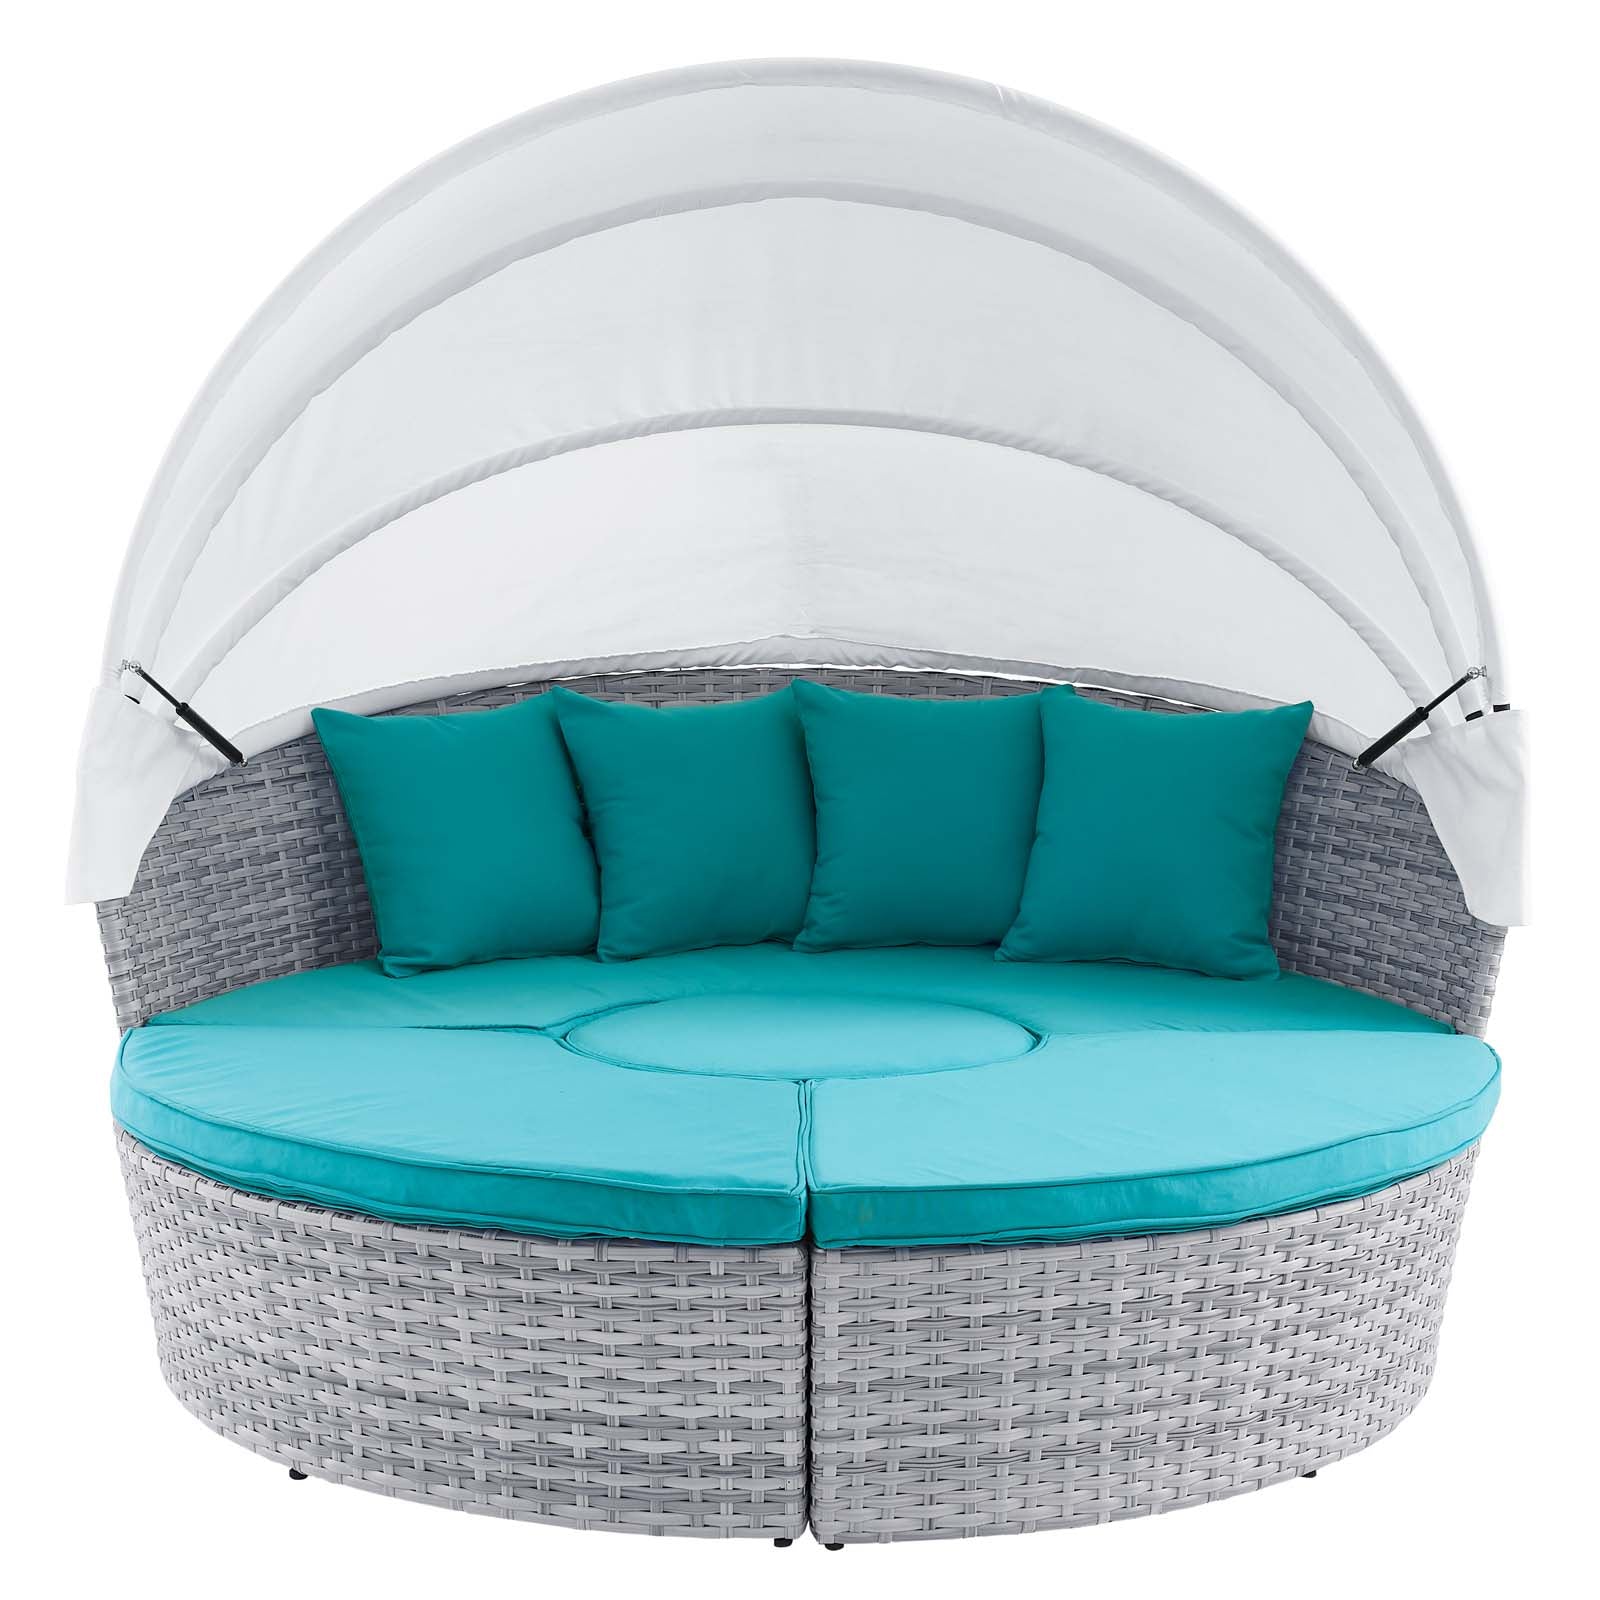 Modway Patio Daybeds - Scottsdale Canopy Sunbrella Outdoor Patio Daybed Light Gray Aruba